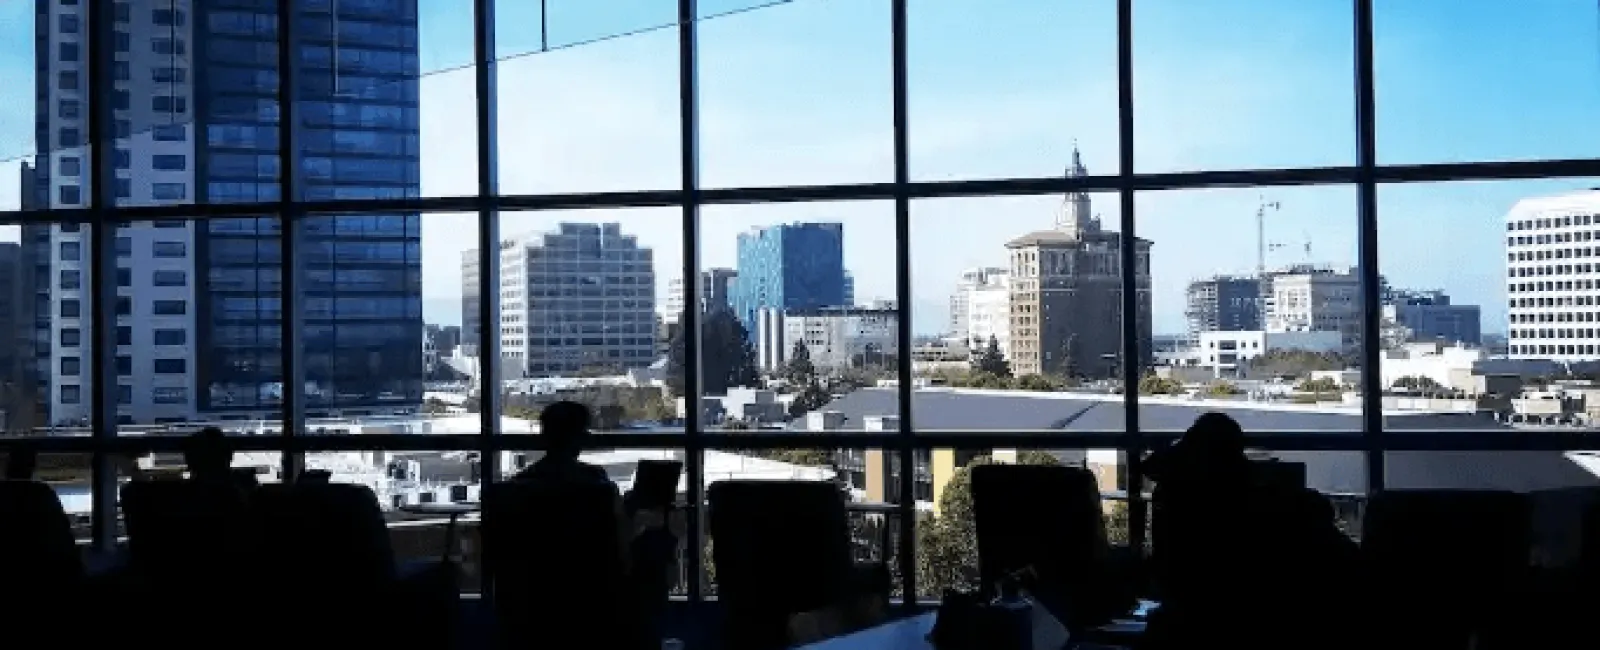 The 5 Top Industries in San Jose You Should Be Keeping Top of Mind